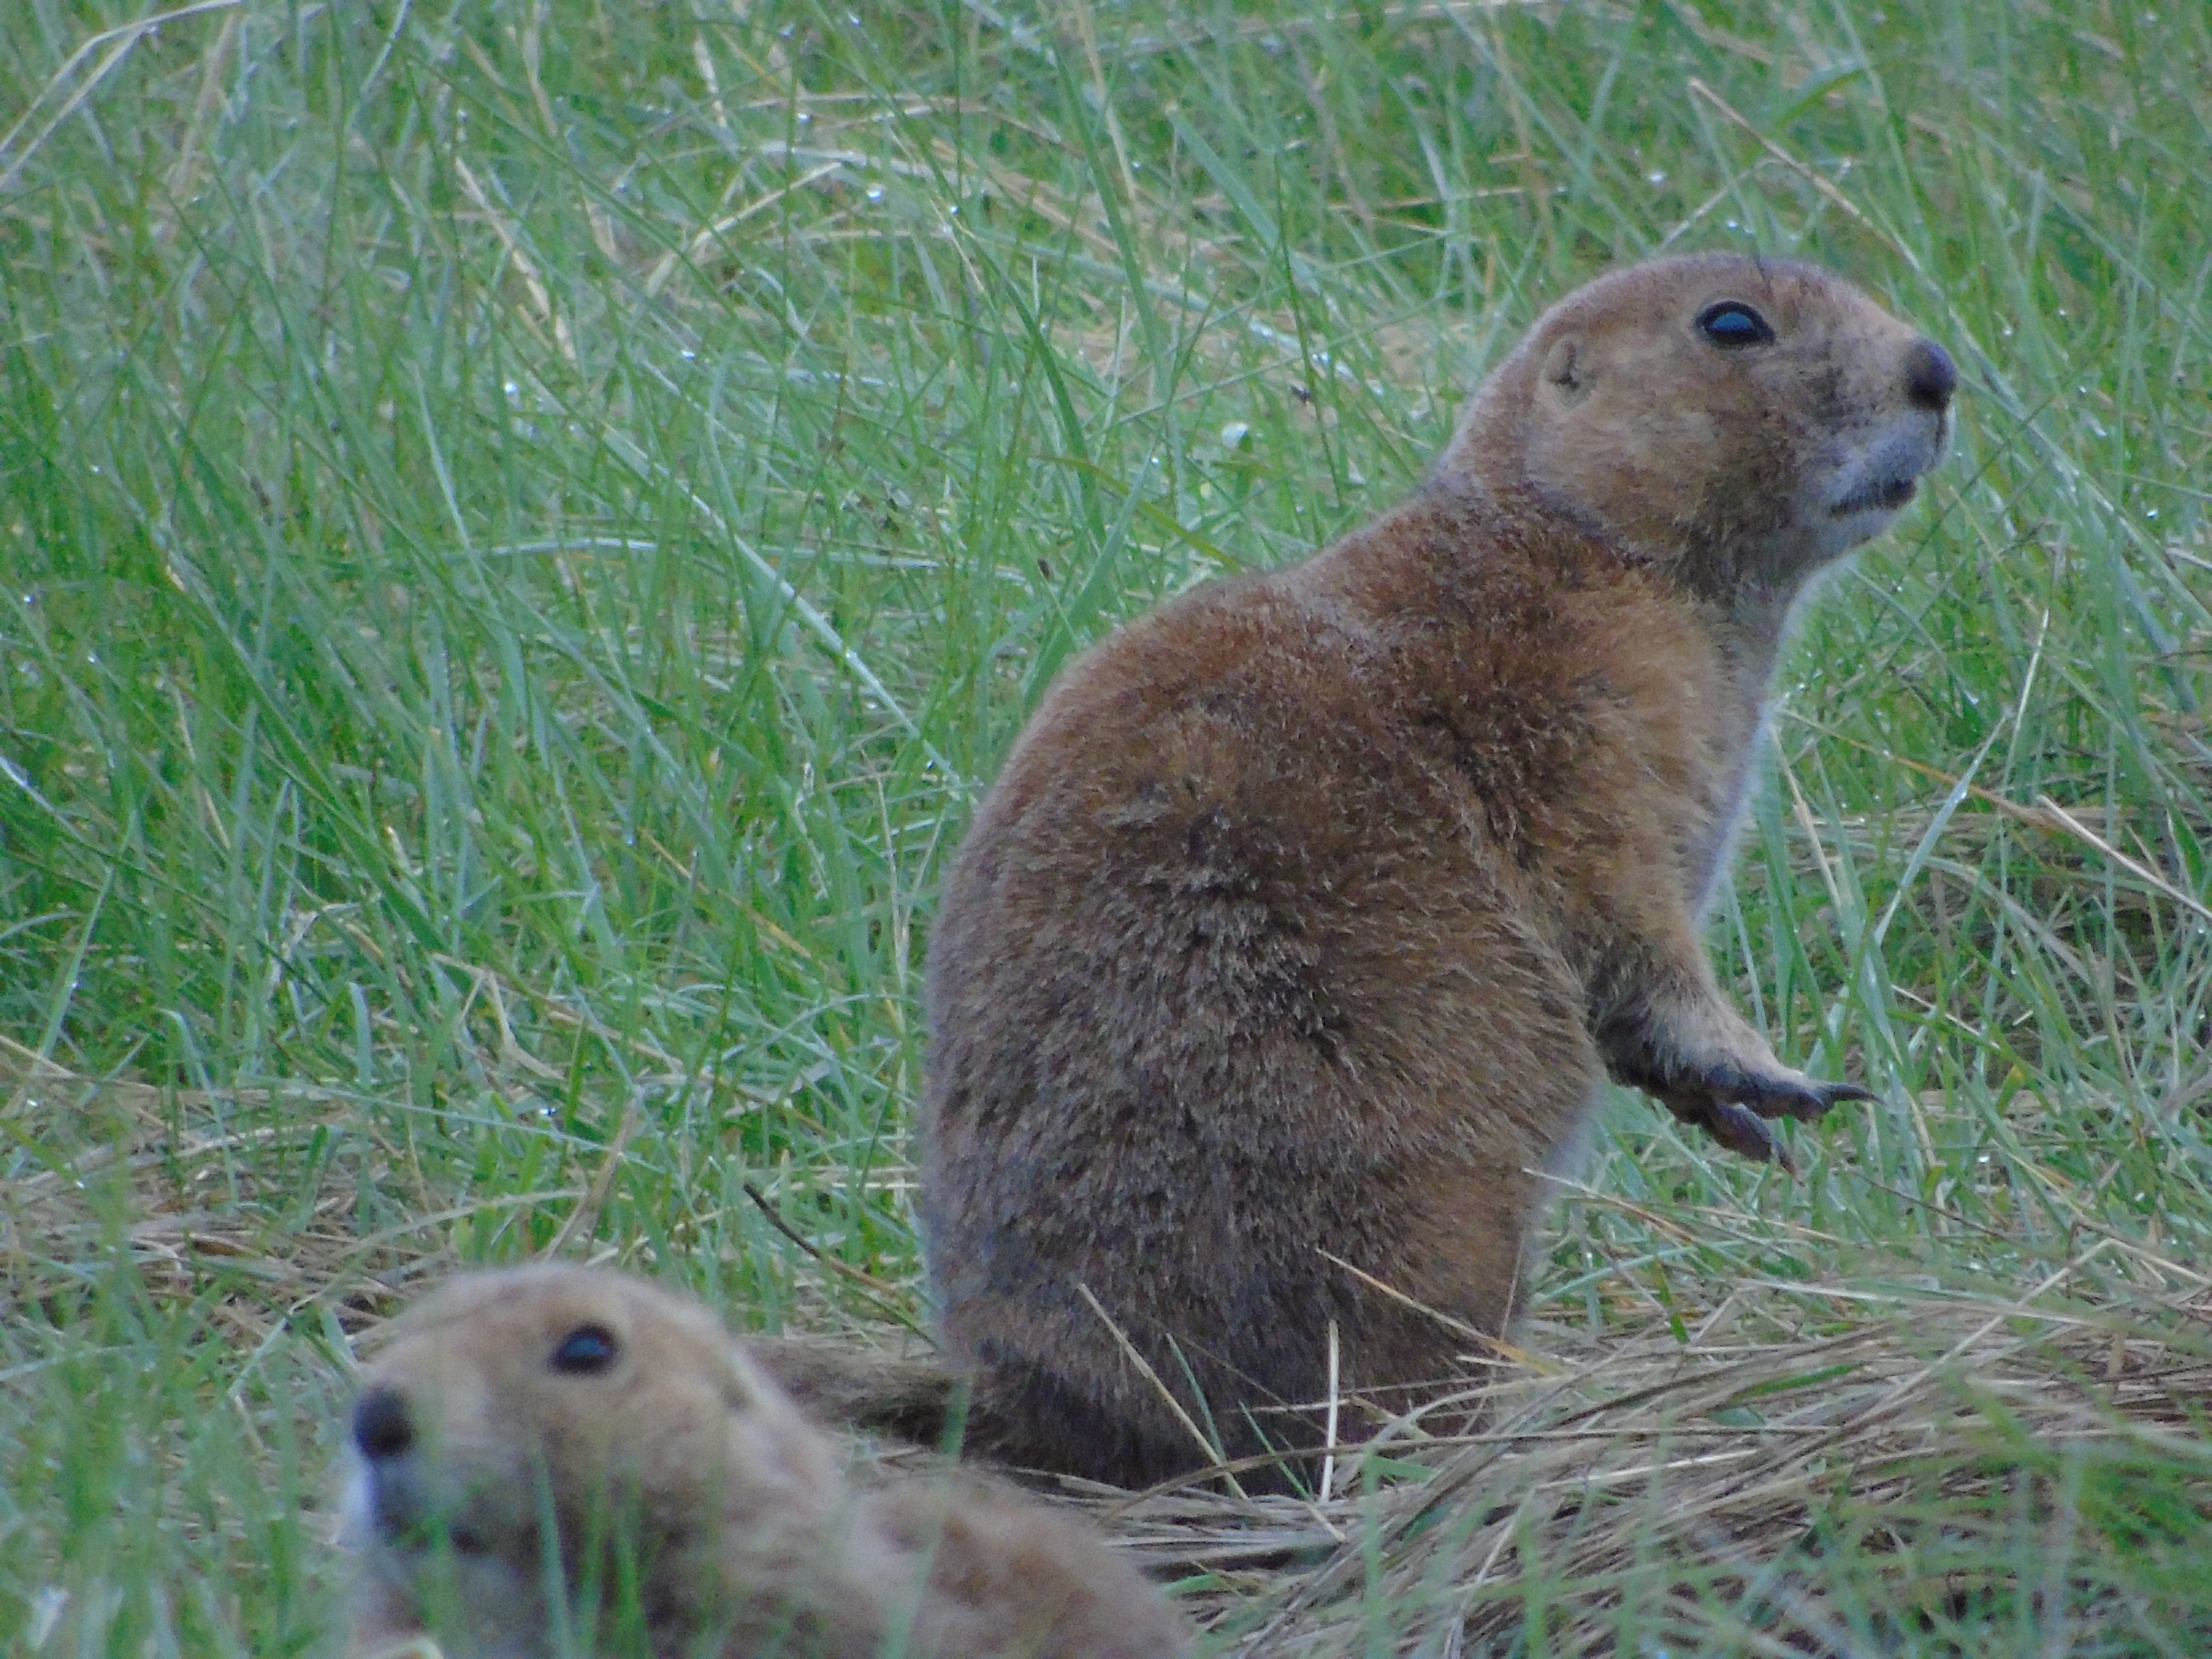 Keep your eyes alert for prairie dogs and other small critters along the roads.